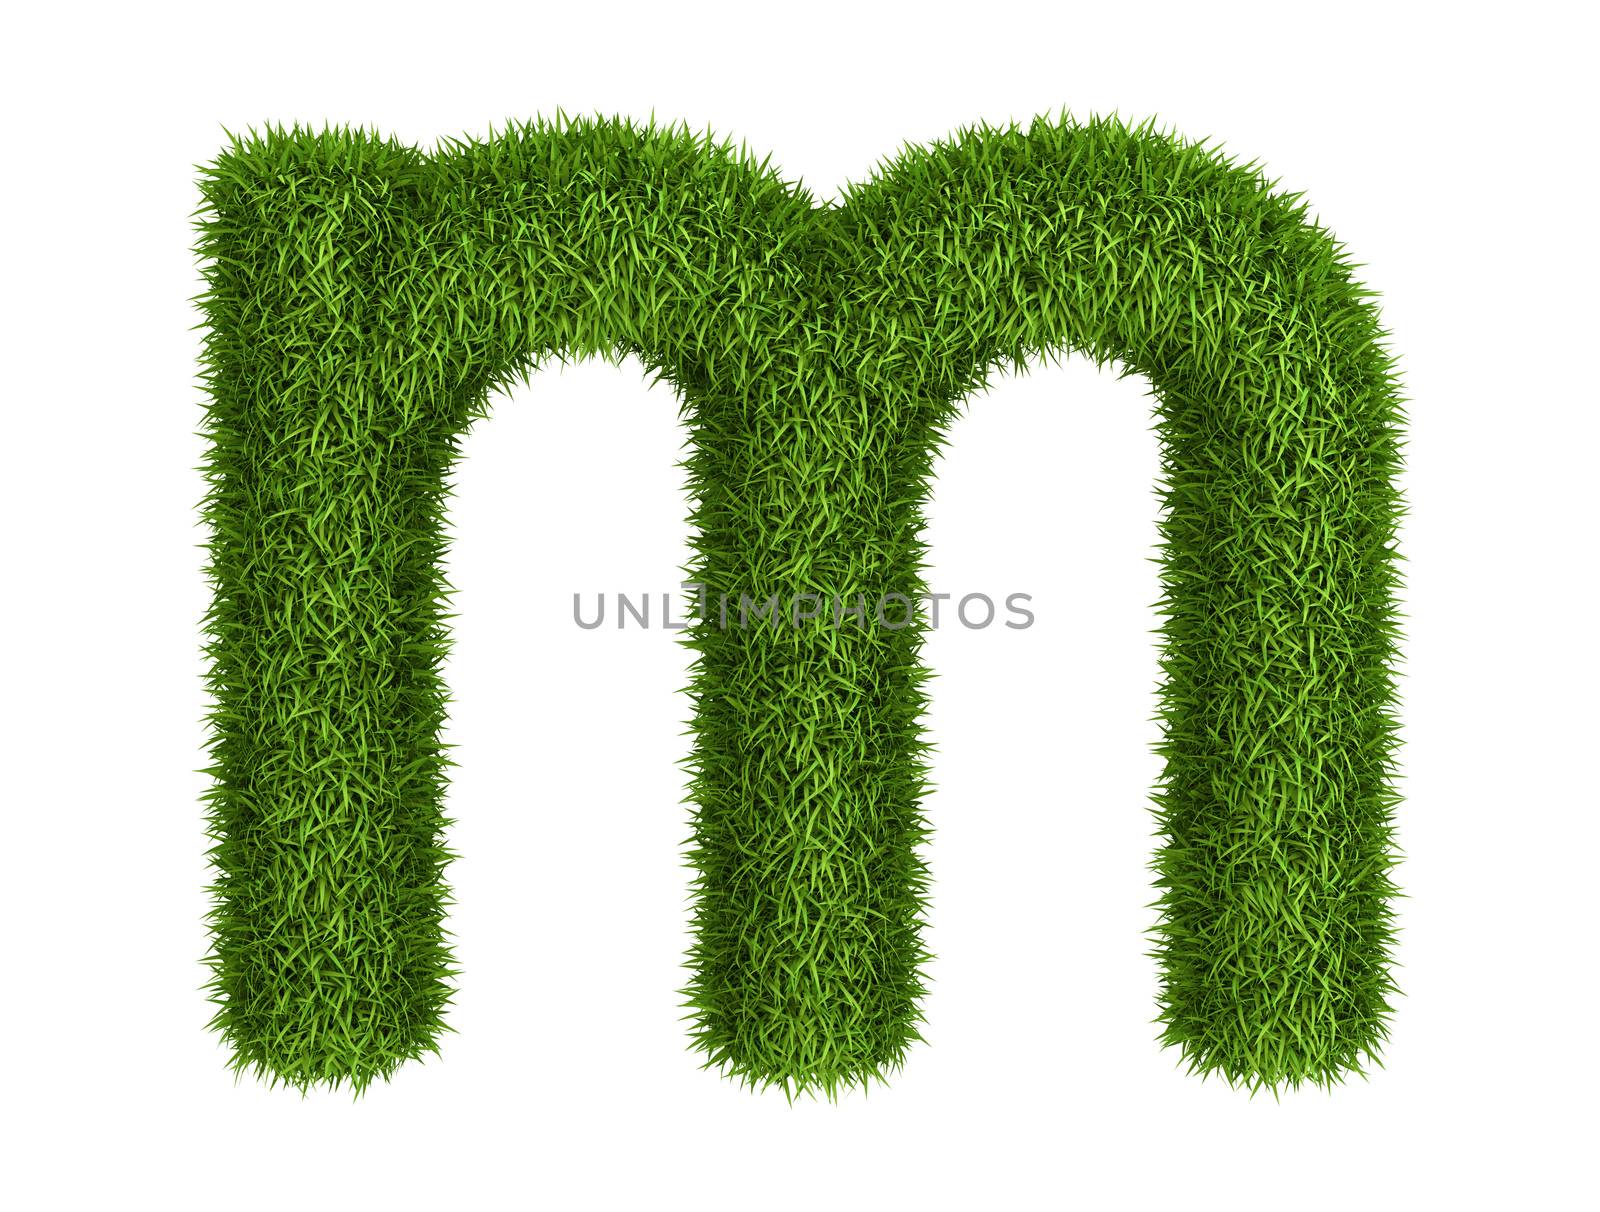 Natural grass letter m lowercase by iunewind